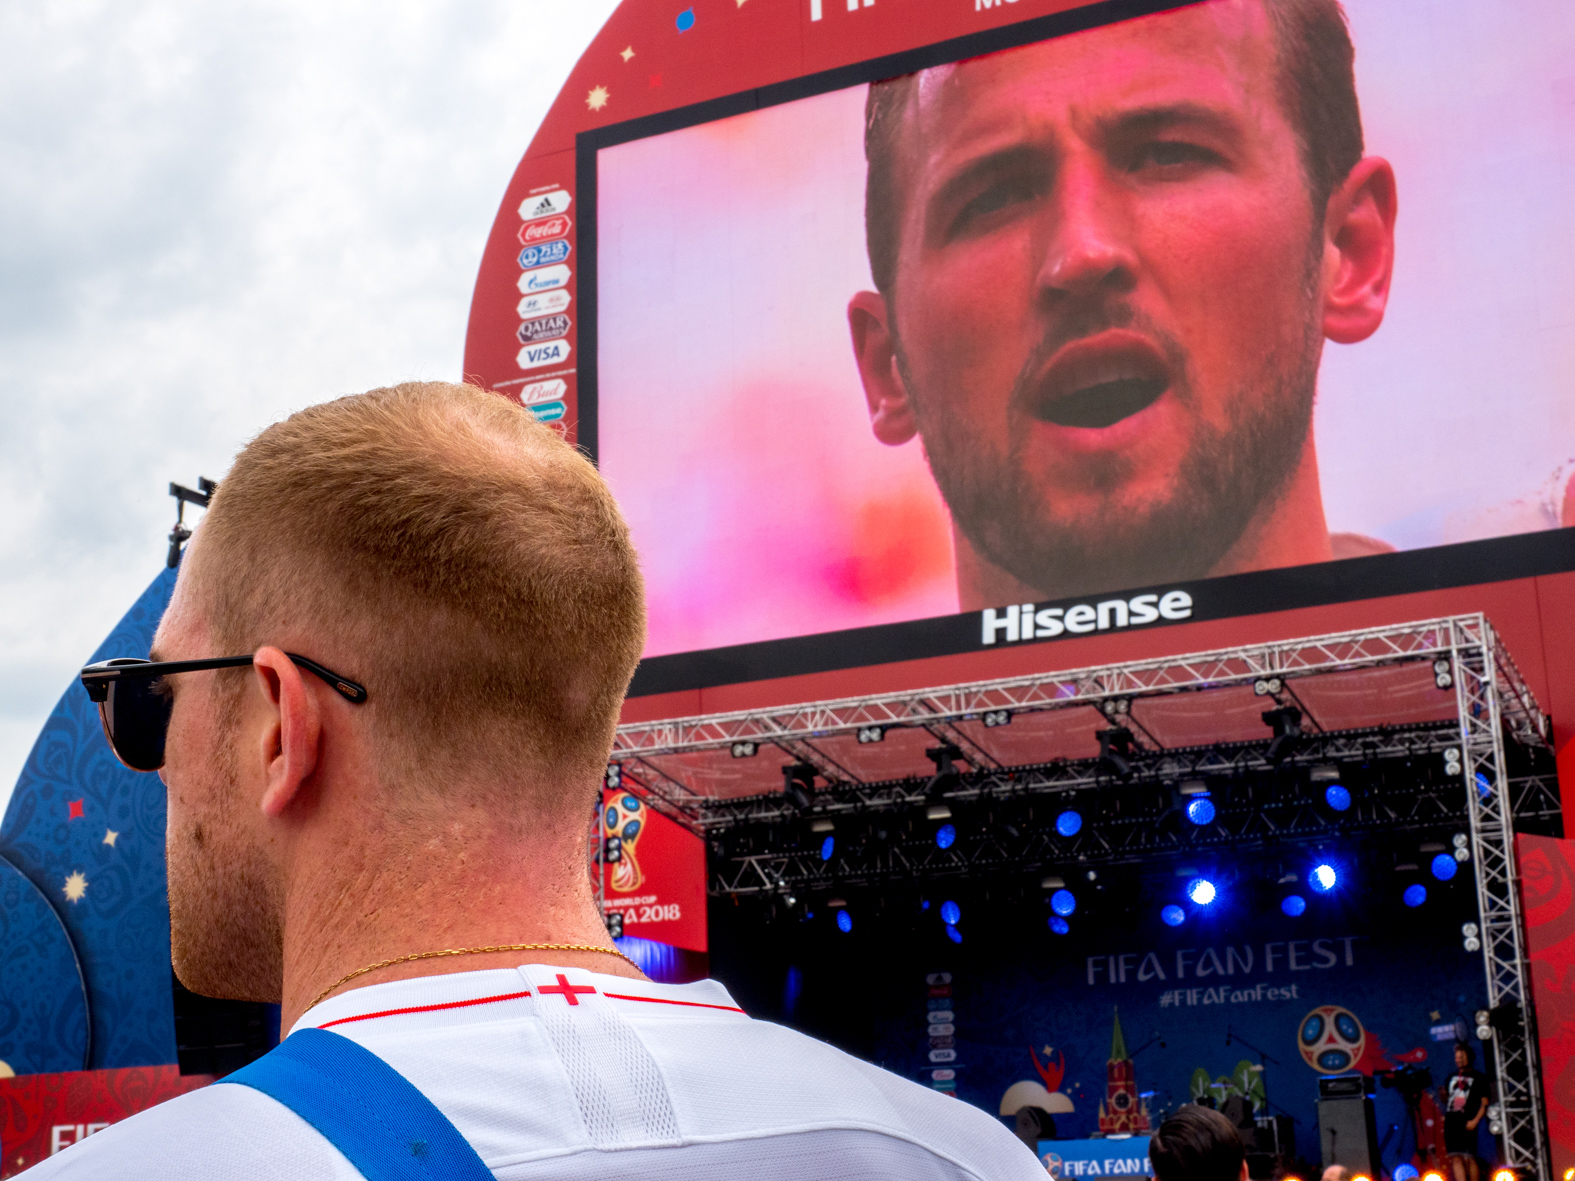 England captain, Harry Kane, featured singing the English national anthem on a big screen at FIFA Fan Fest.  The Moscow FIFA Fan Fest located at Vorobyovy Gory (Sparrow Hills) with a venue Capacity of 25,000. The site provides a spectacular view down the hill, directly towards Luzhniki Stadium and Moscow City. The 21st FIFA World Cup football tournament took place in Russia in 2018. It was the first World Cup to be held in Eastern Europe and the eleventh time that it has been held in Europe. For the first time the tournament took place on two continents – Europe and Asia. All but two of the stadium venues were in European Russia.